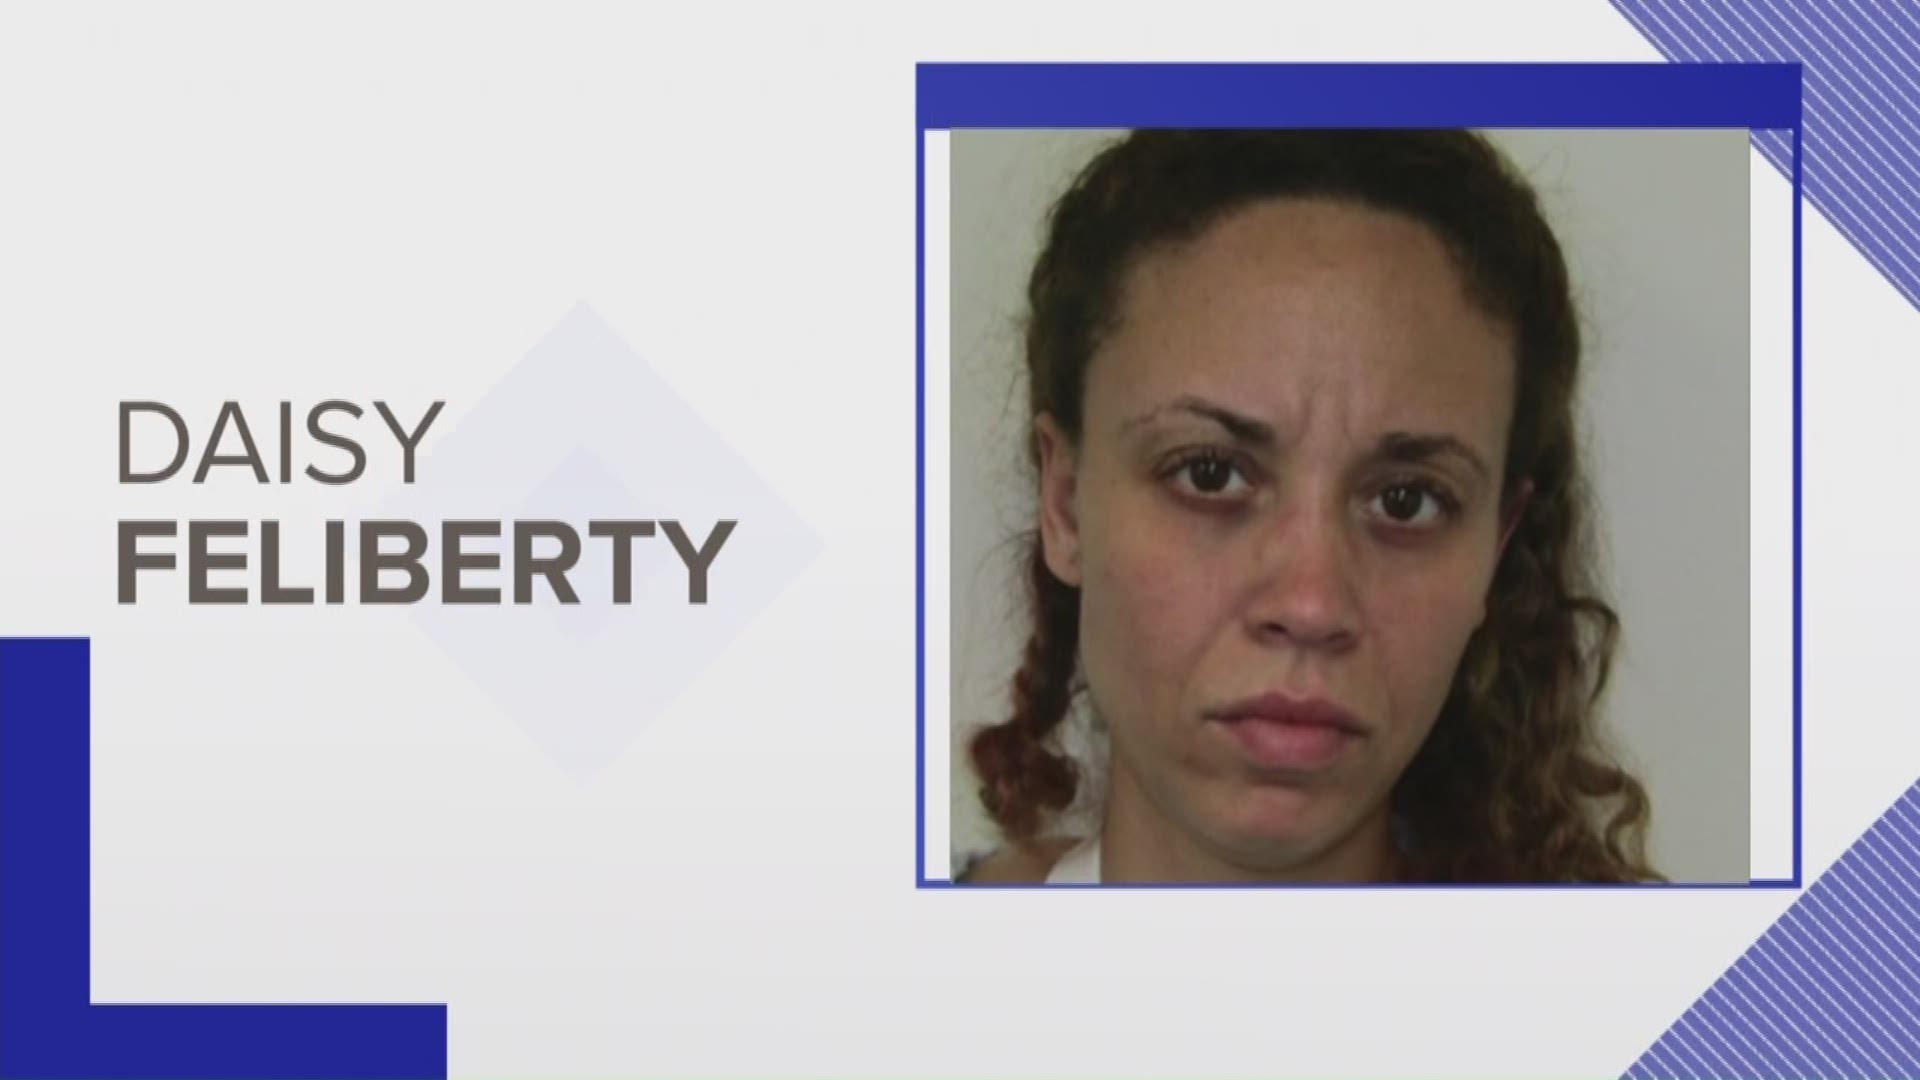 Second suspect, Daisy Feliberty, 35 was booked at Richland County jail after release from hospital after being shot by police